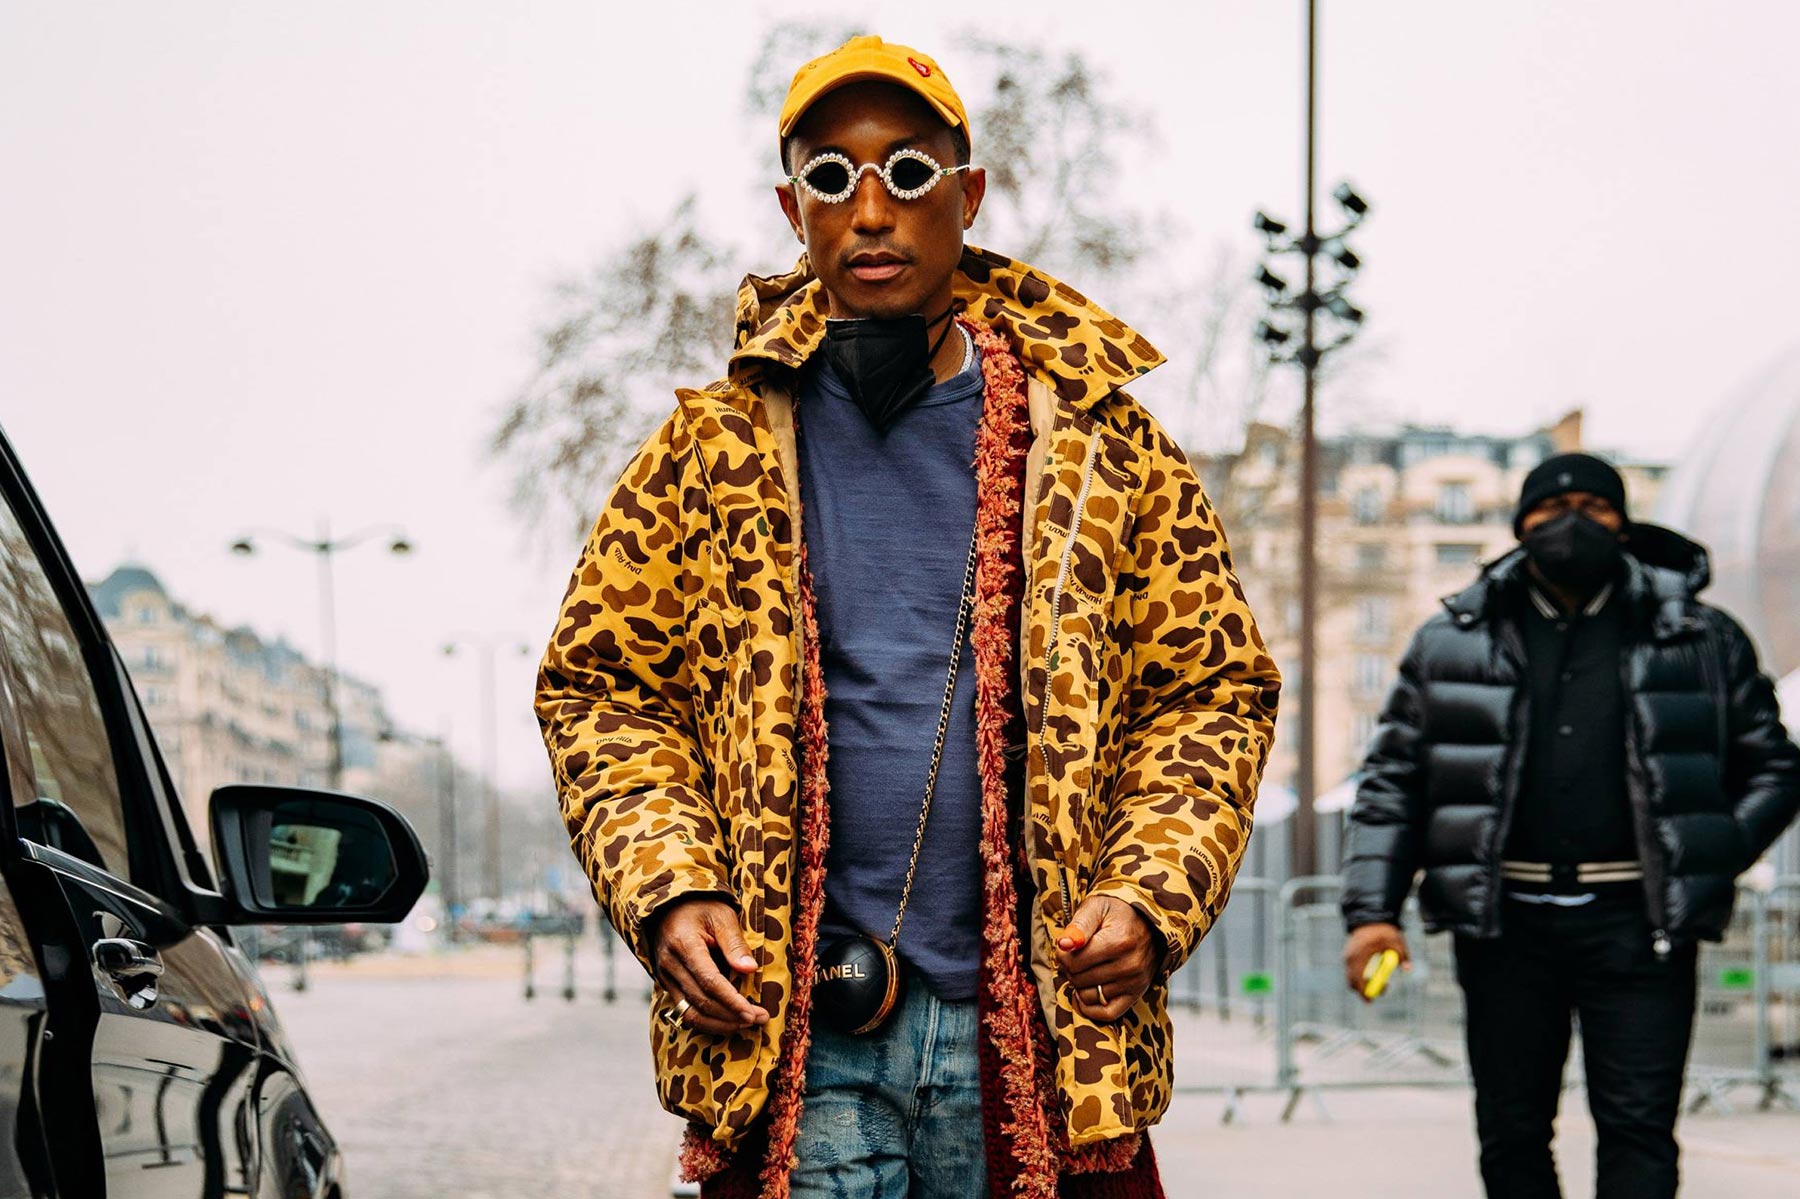 Charting the fashion history of Pharrell Williams, the new creative  director for Louis Vuitton menswear